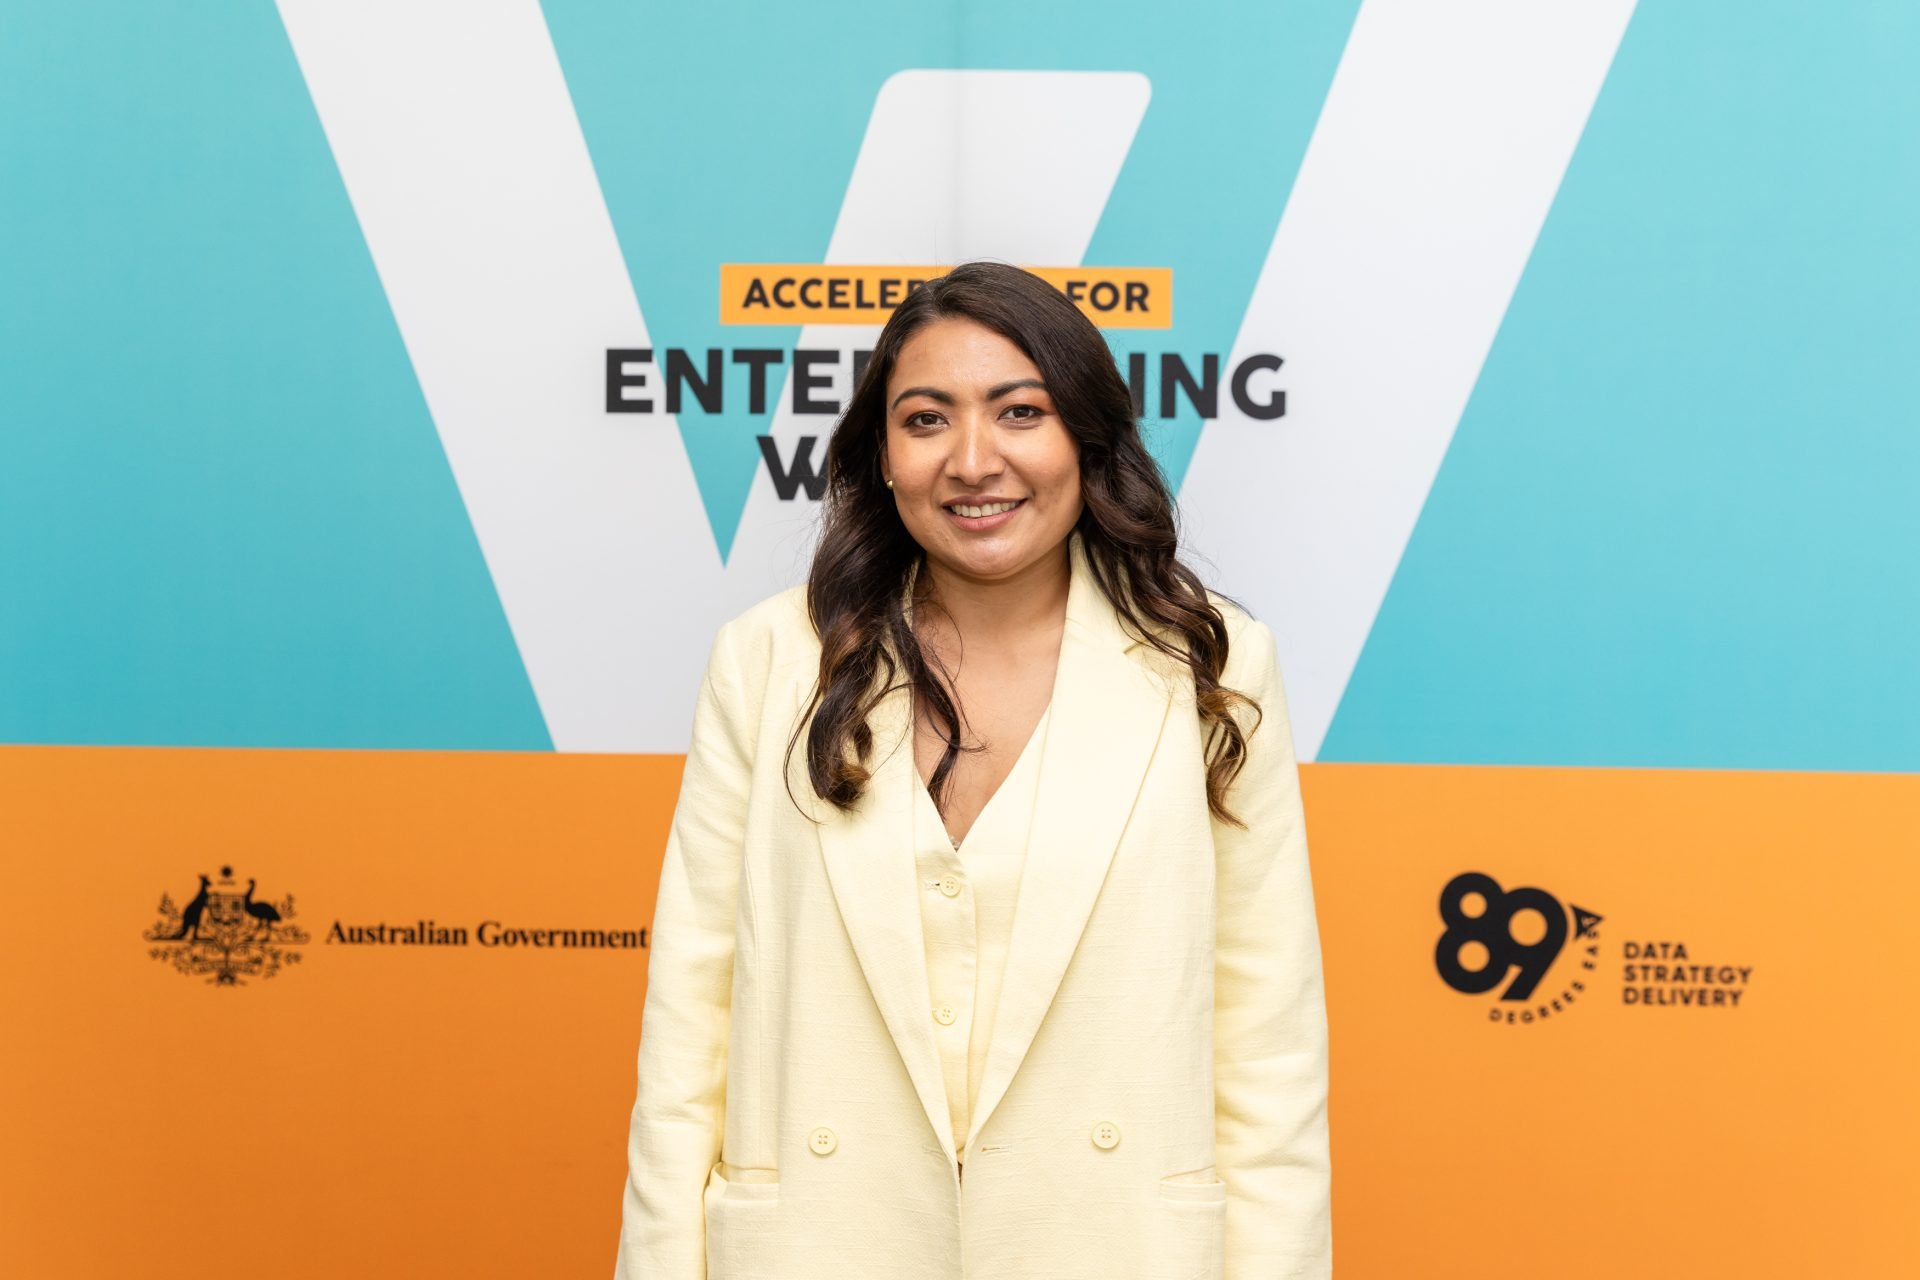 A woman with long dark hair, wearing a light yellow blazer, smiles while standing in front of a backdrop with bold colors and text that reads "Accelerator for Enterprising Women," along with logos for the Australian Government and 89 Degrees East Data Strategy Delivery.